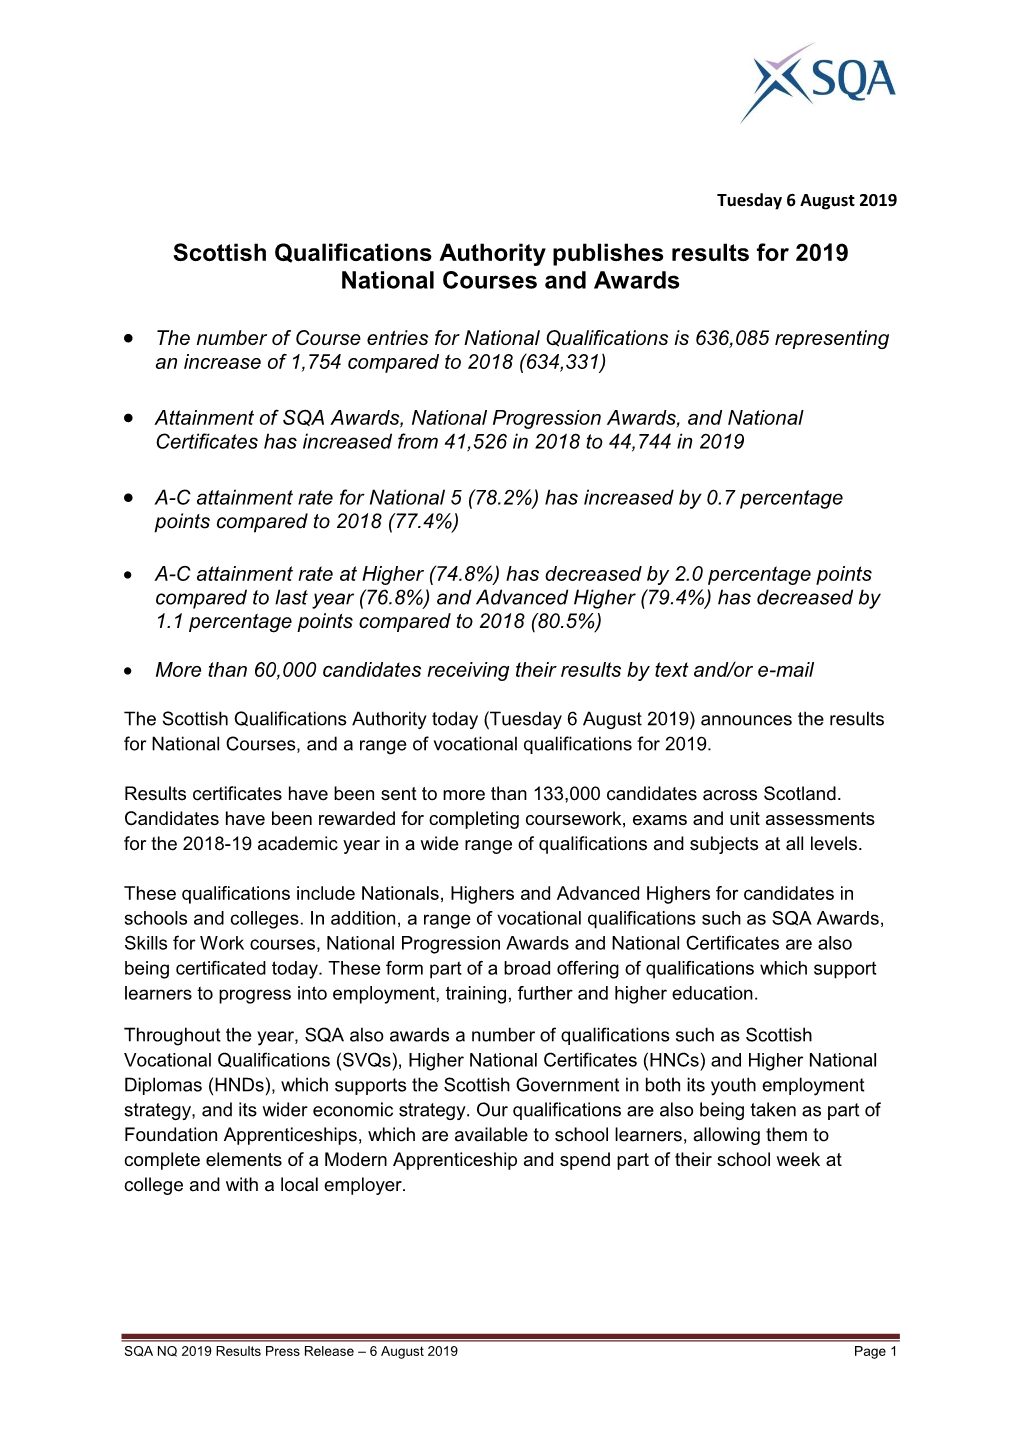 Scottish Qualifications Authority Publishes Results for 2019 National Courses and Awards